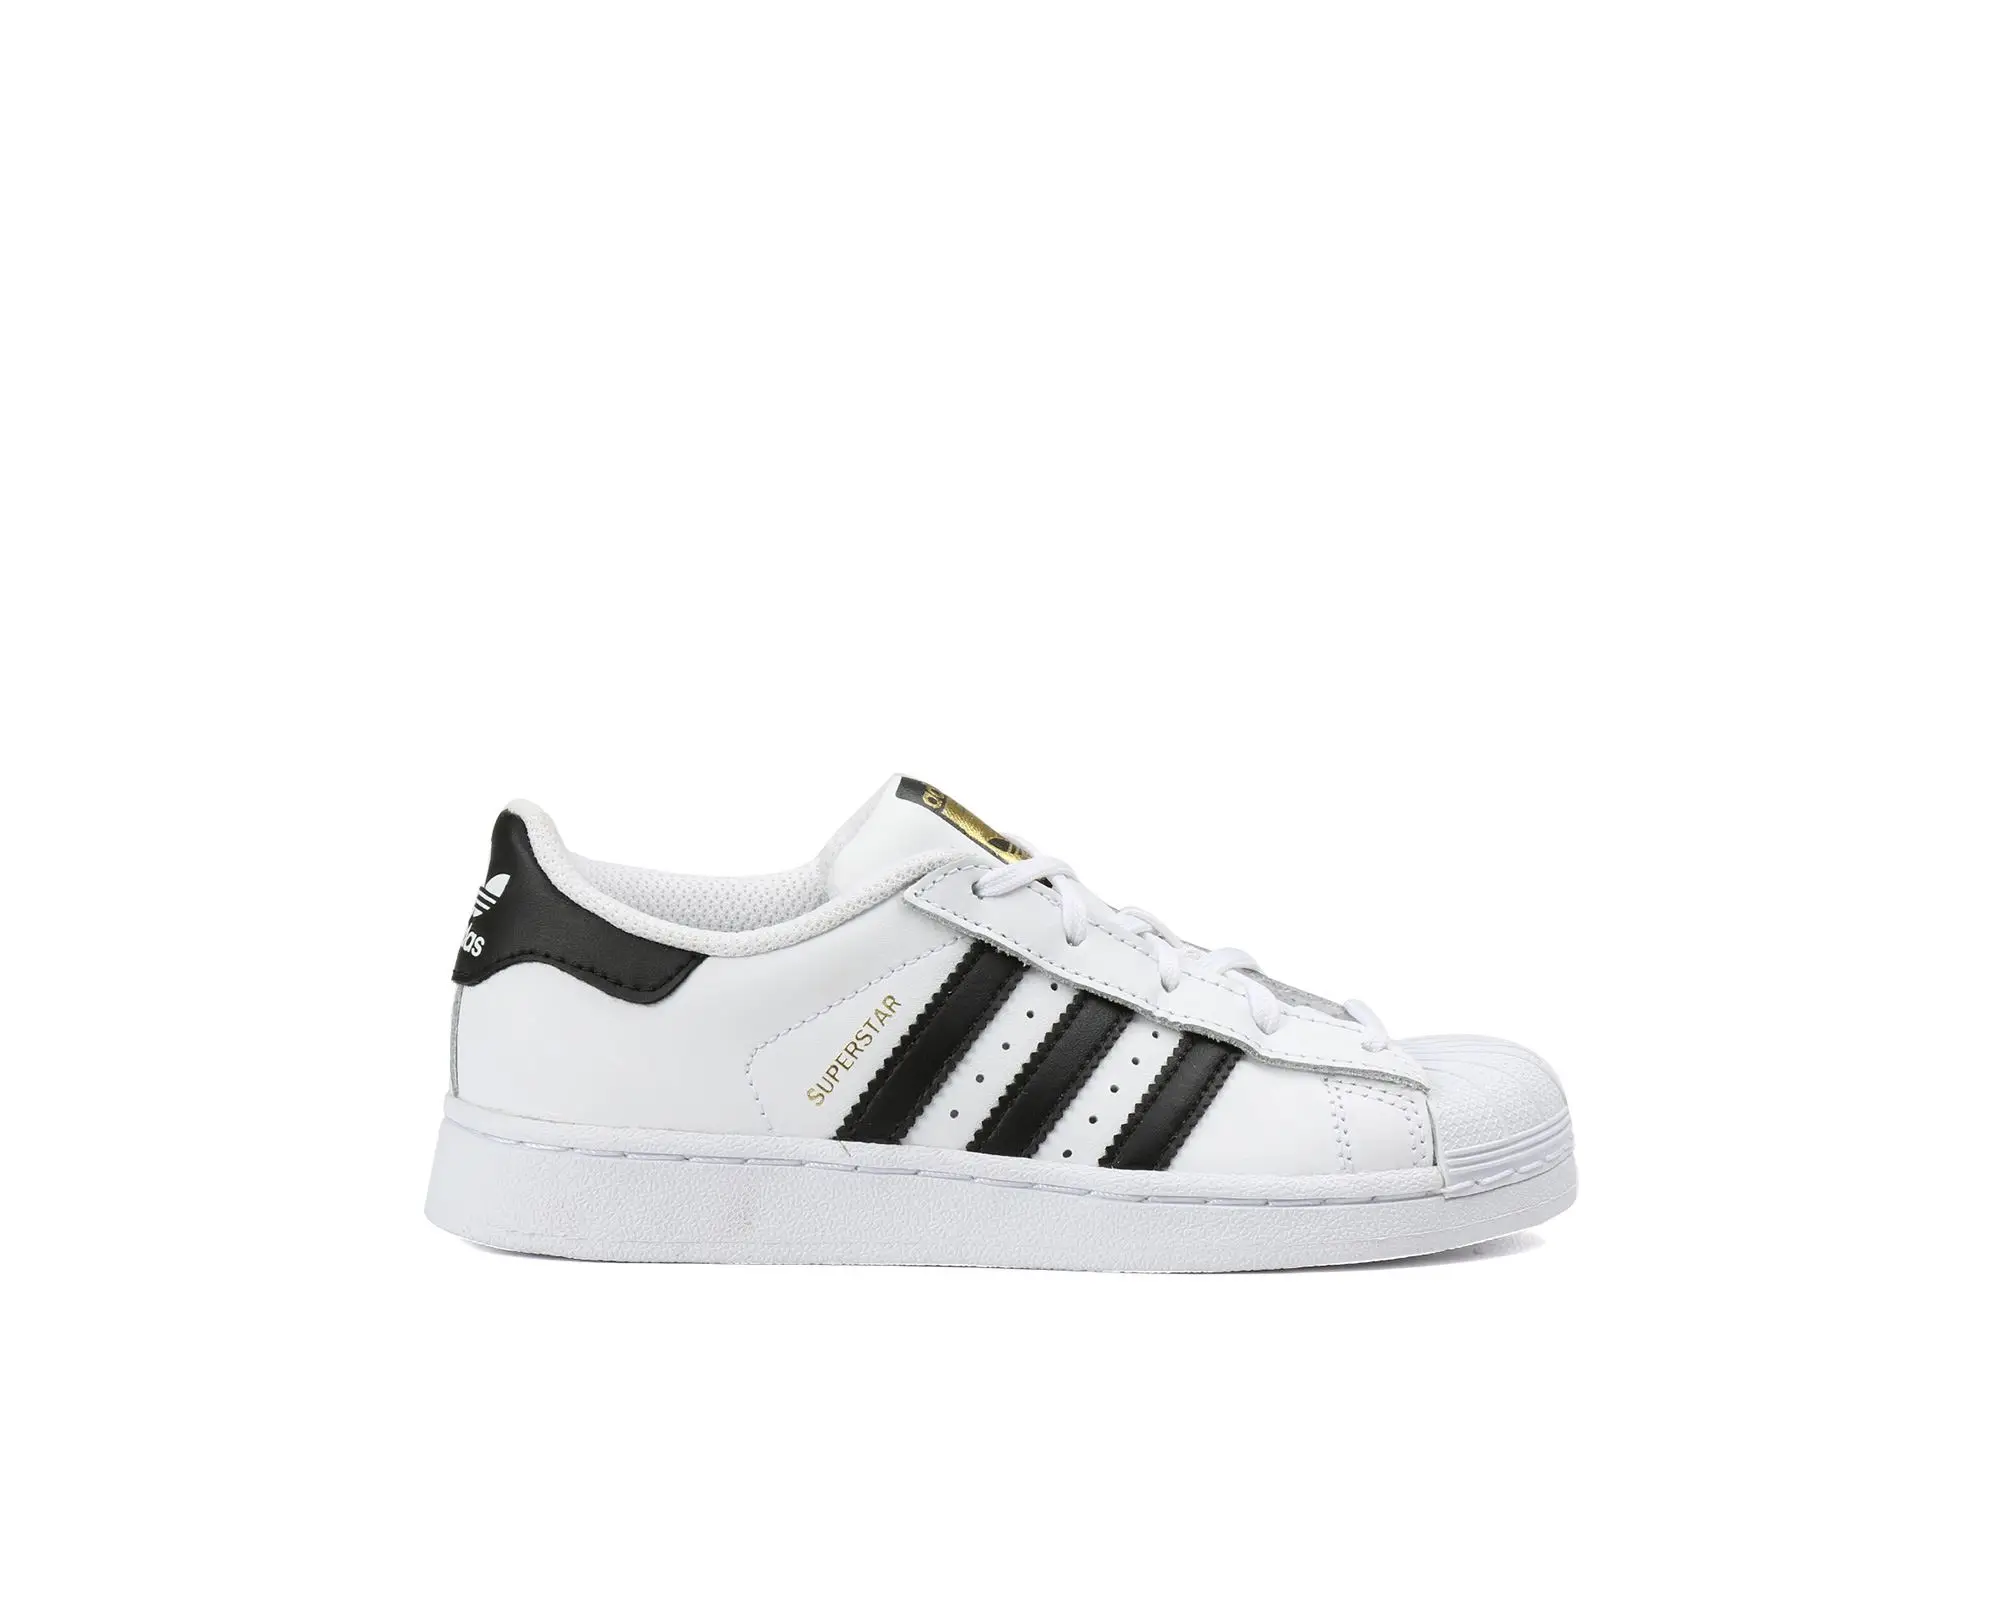 Adidas Original Superstar Foundation hand C White Kids Shoes Unisex Girls & Boys Casual Sneakers